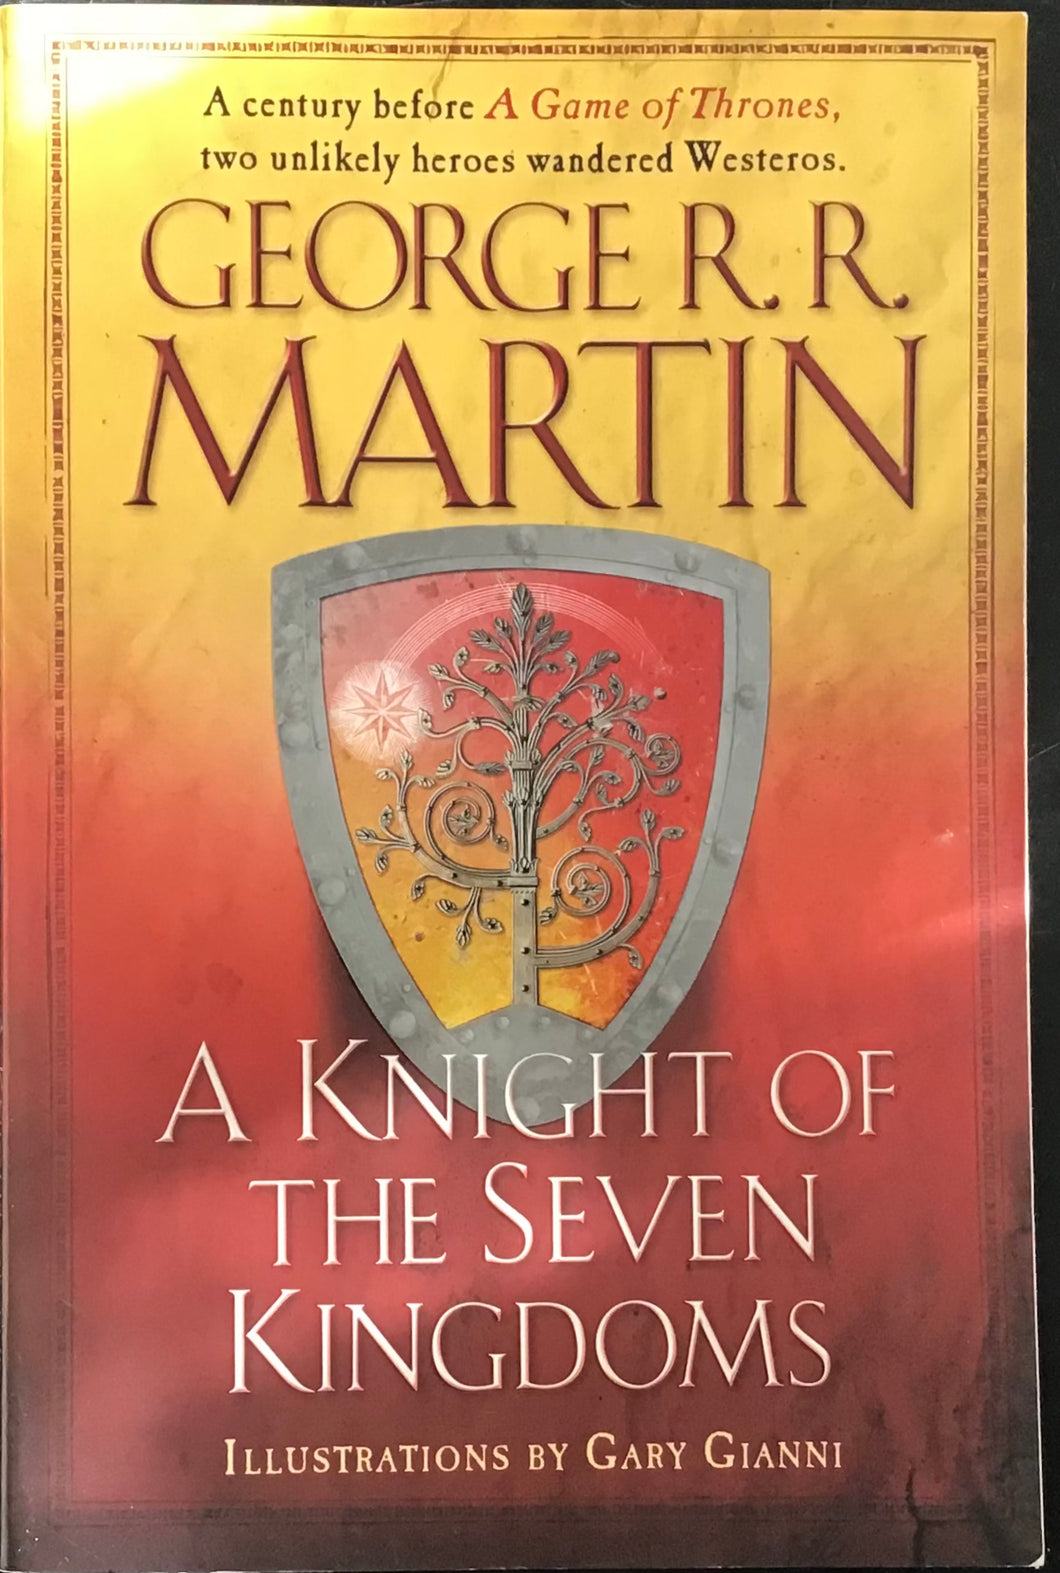 A Knight Of The Seven Kingdoms, George R. Martin